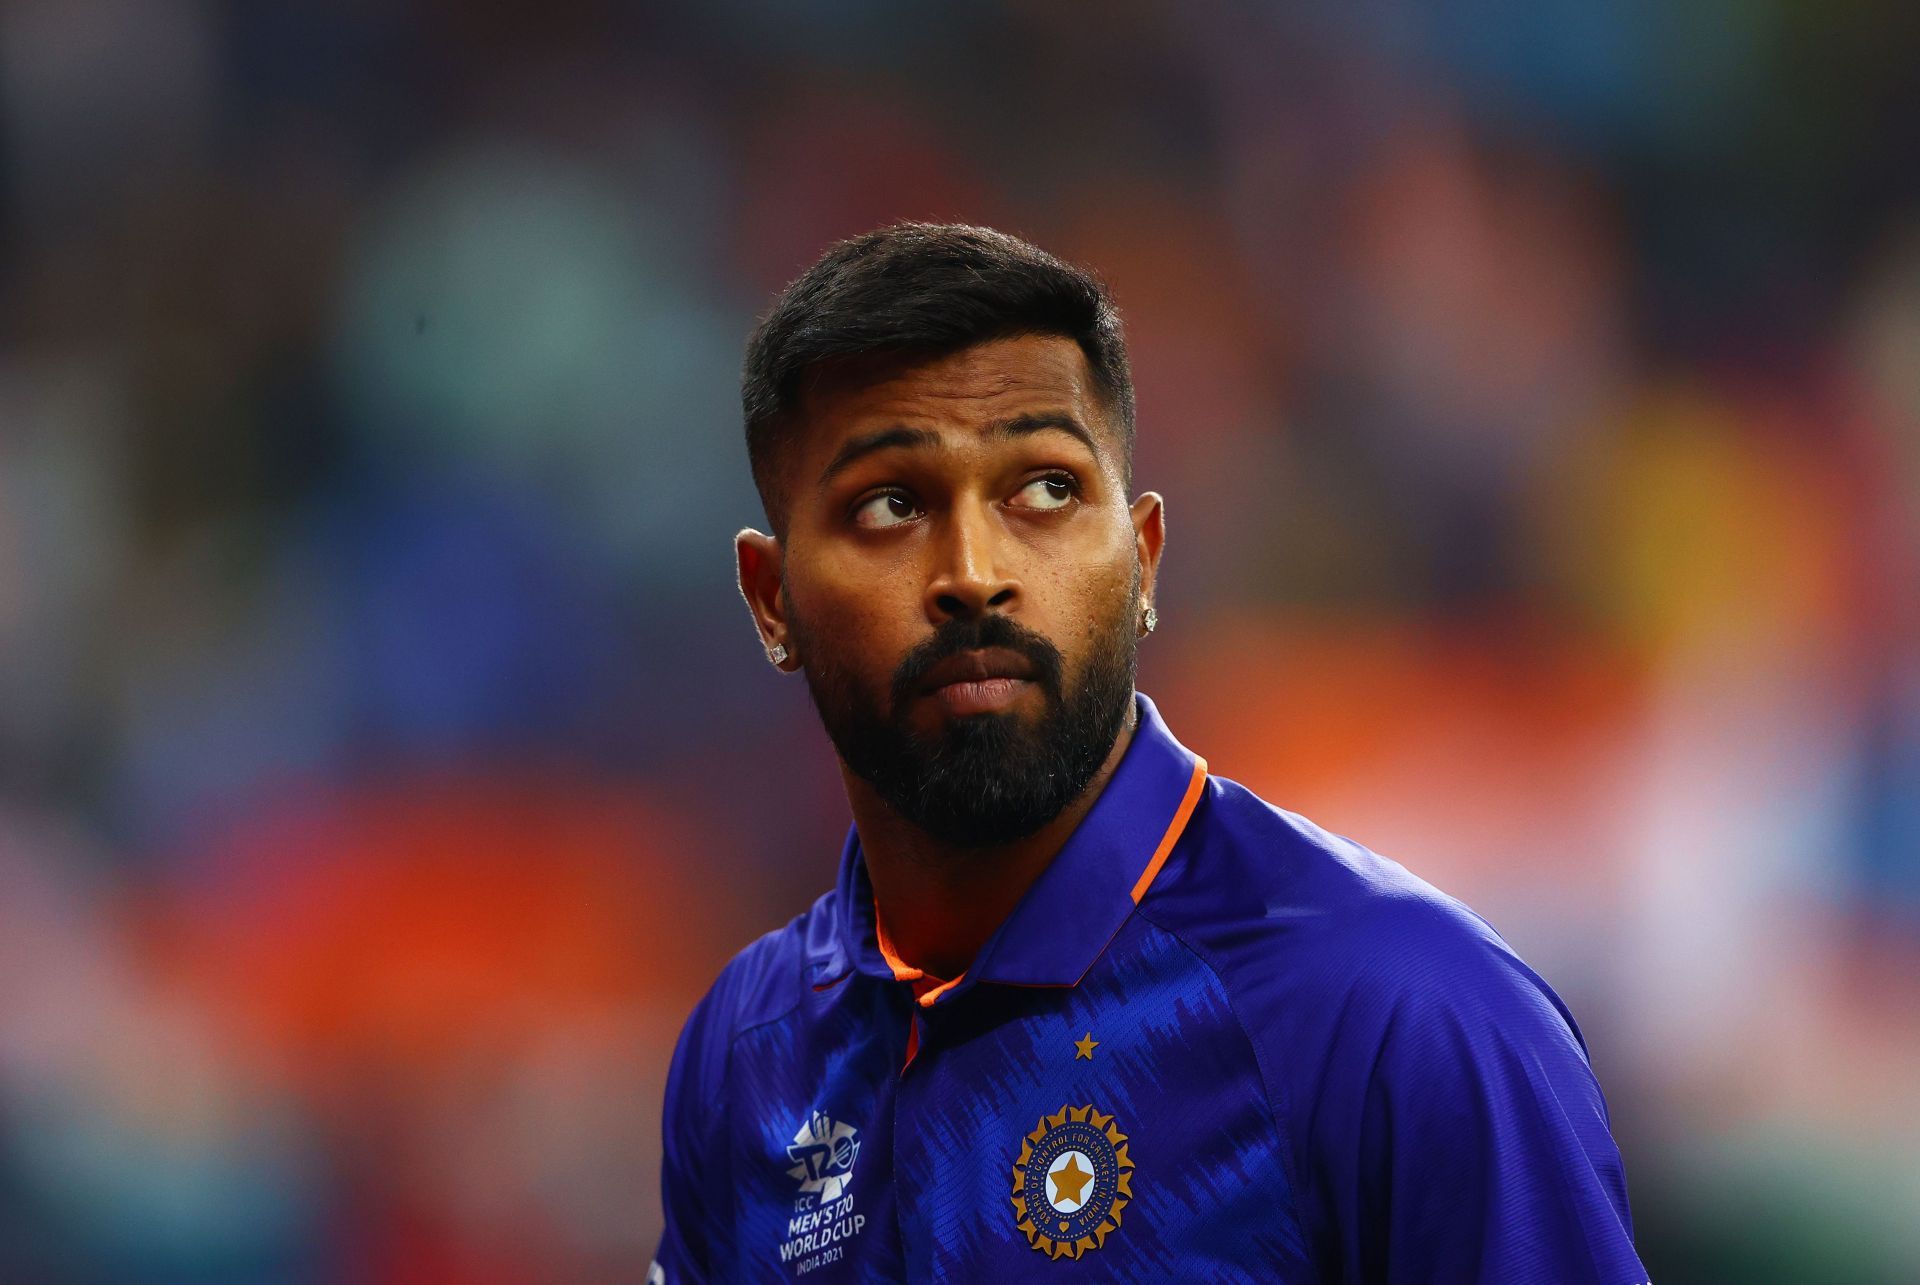 Hardik Pandya played for India in the ICC T20 World Cup last year